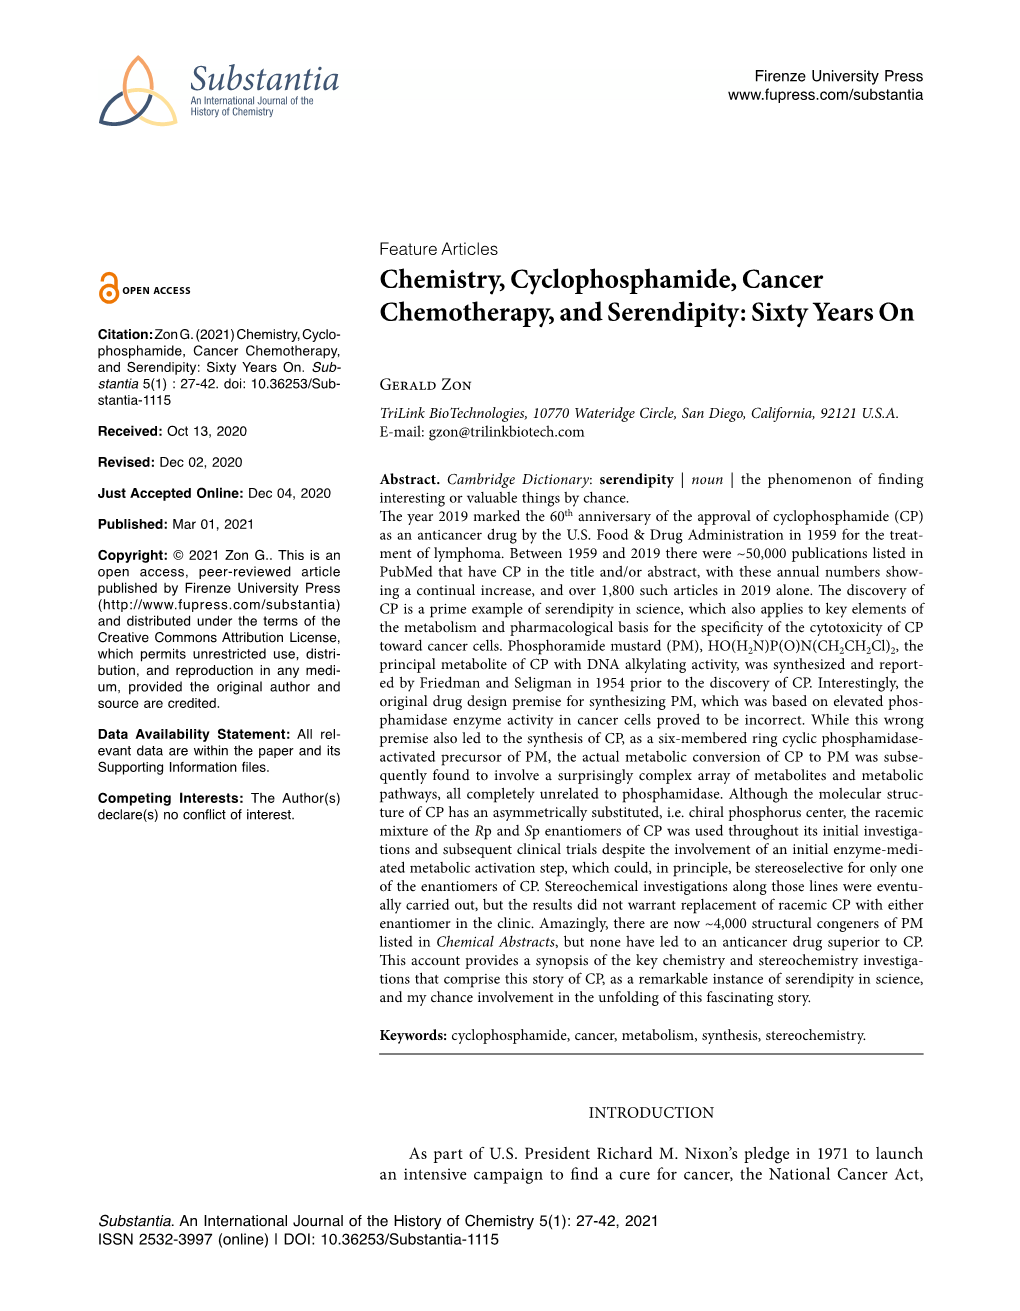 Chemistry, Cyclophosphamide, Cancer Chemotherapy, and Serendipity: Sixty Years on Citation: Zon G